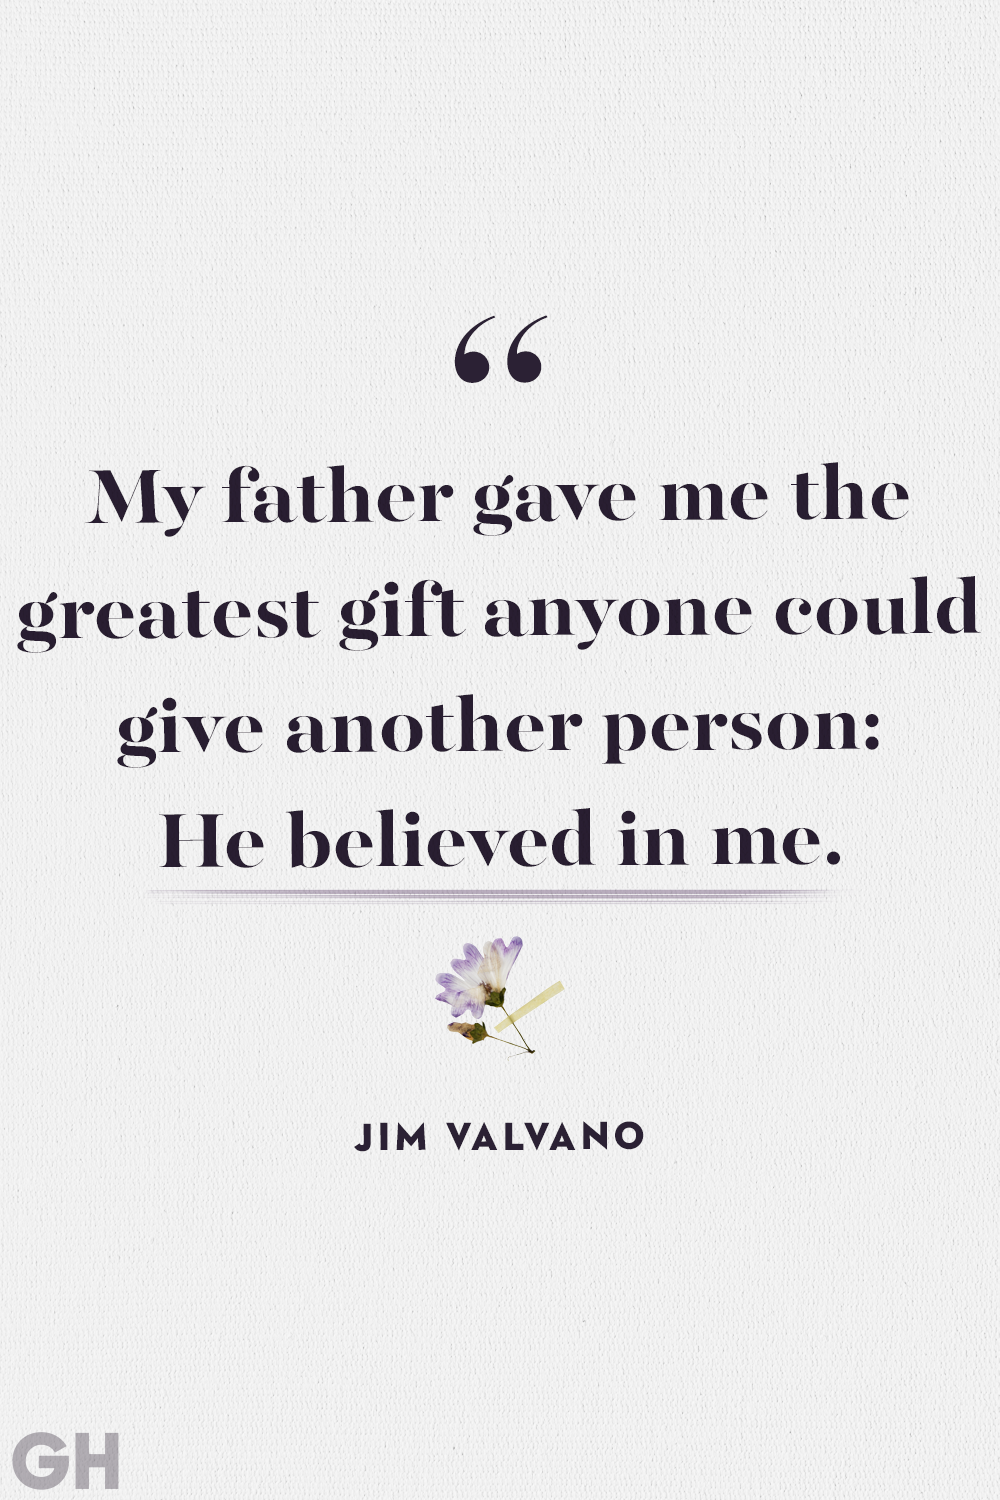 29 Comforting Loss Of Father Quotes - Quotes To Remember Dads Who Passed Away